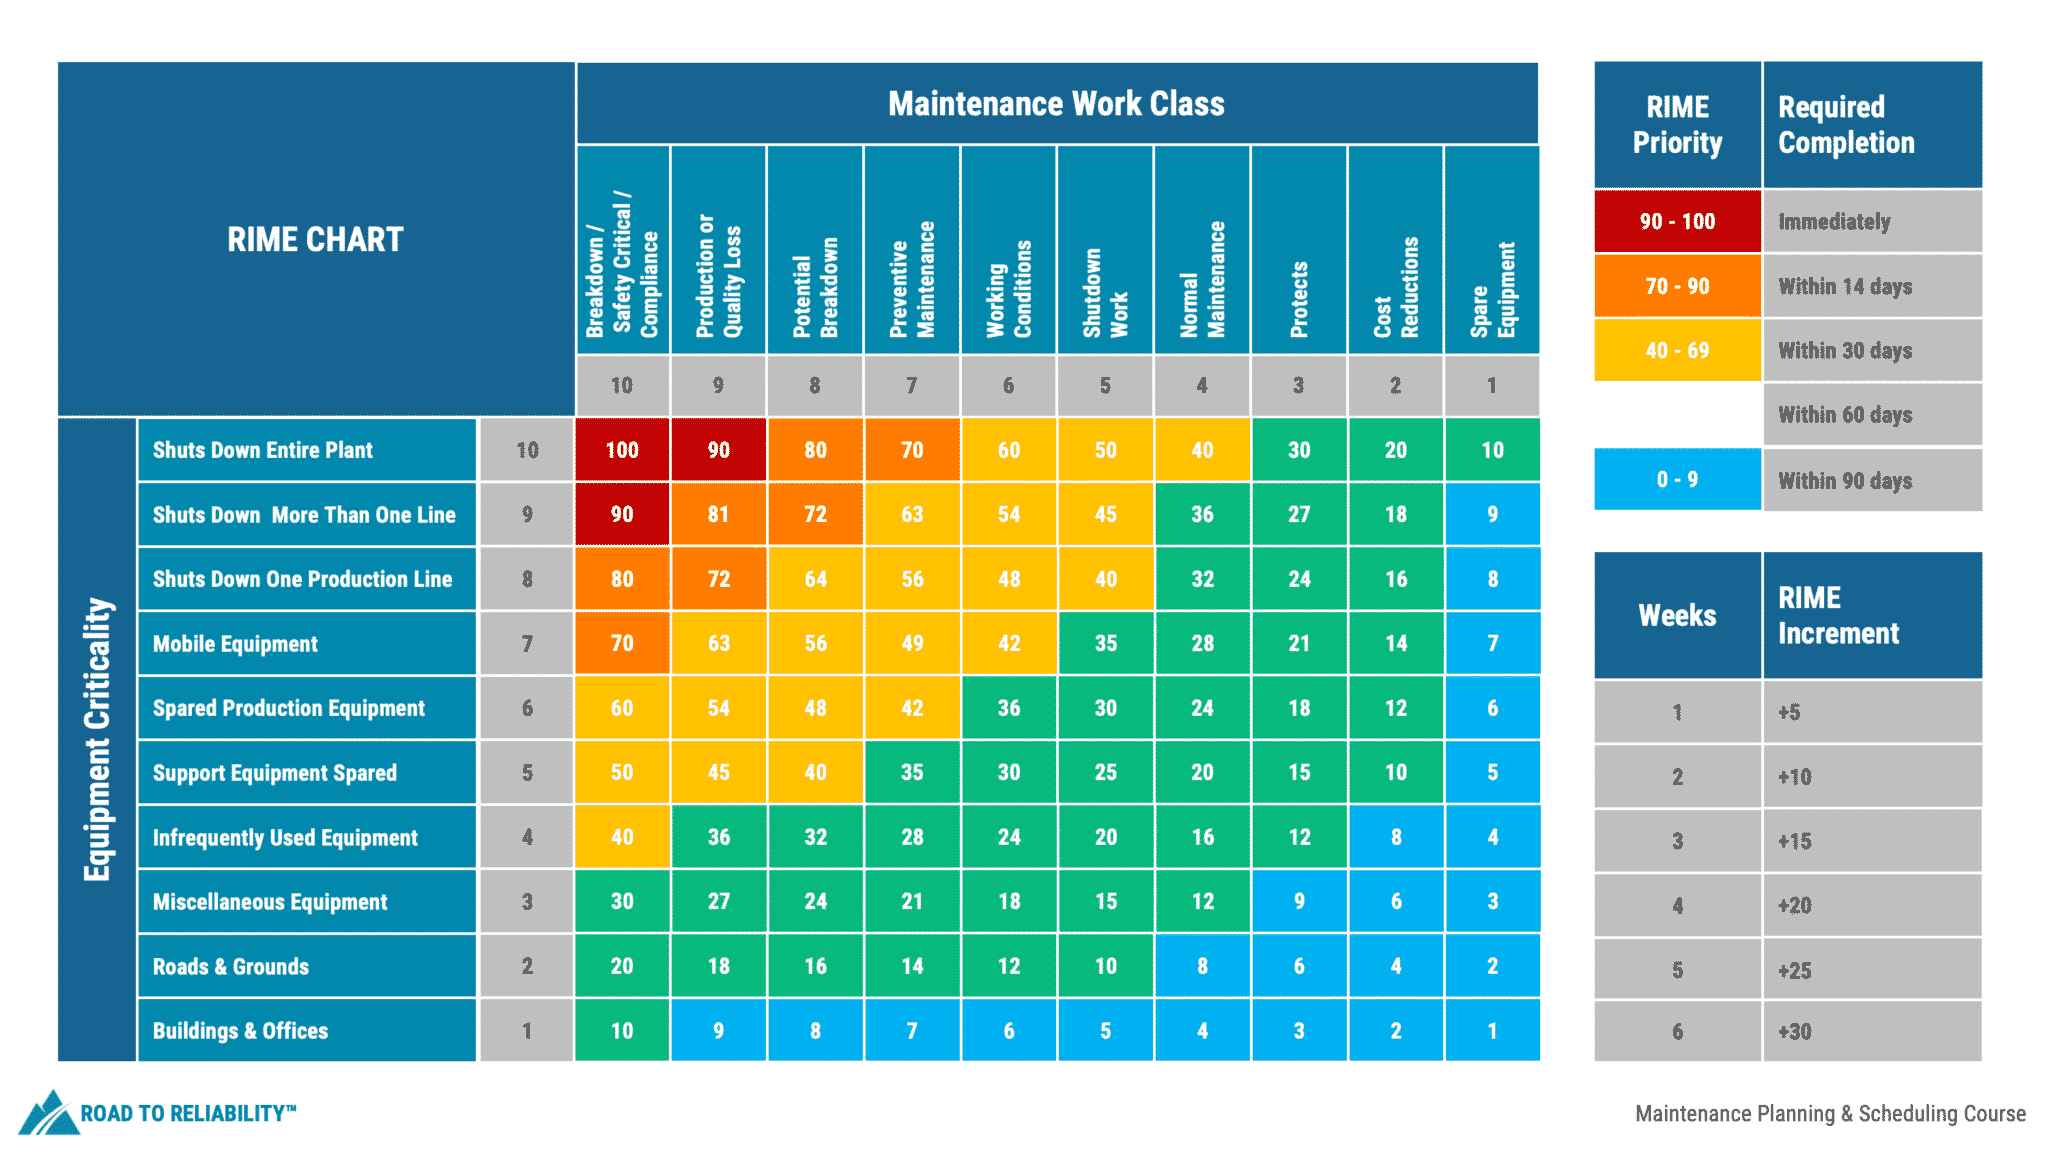 RIME Chart as explained during the maintenance planning and scheduling online training course